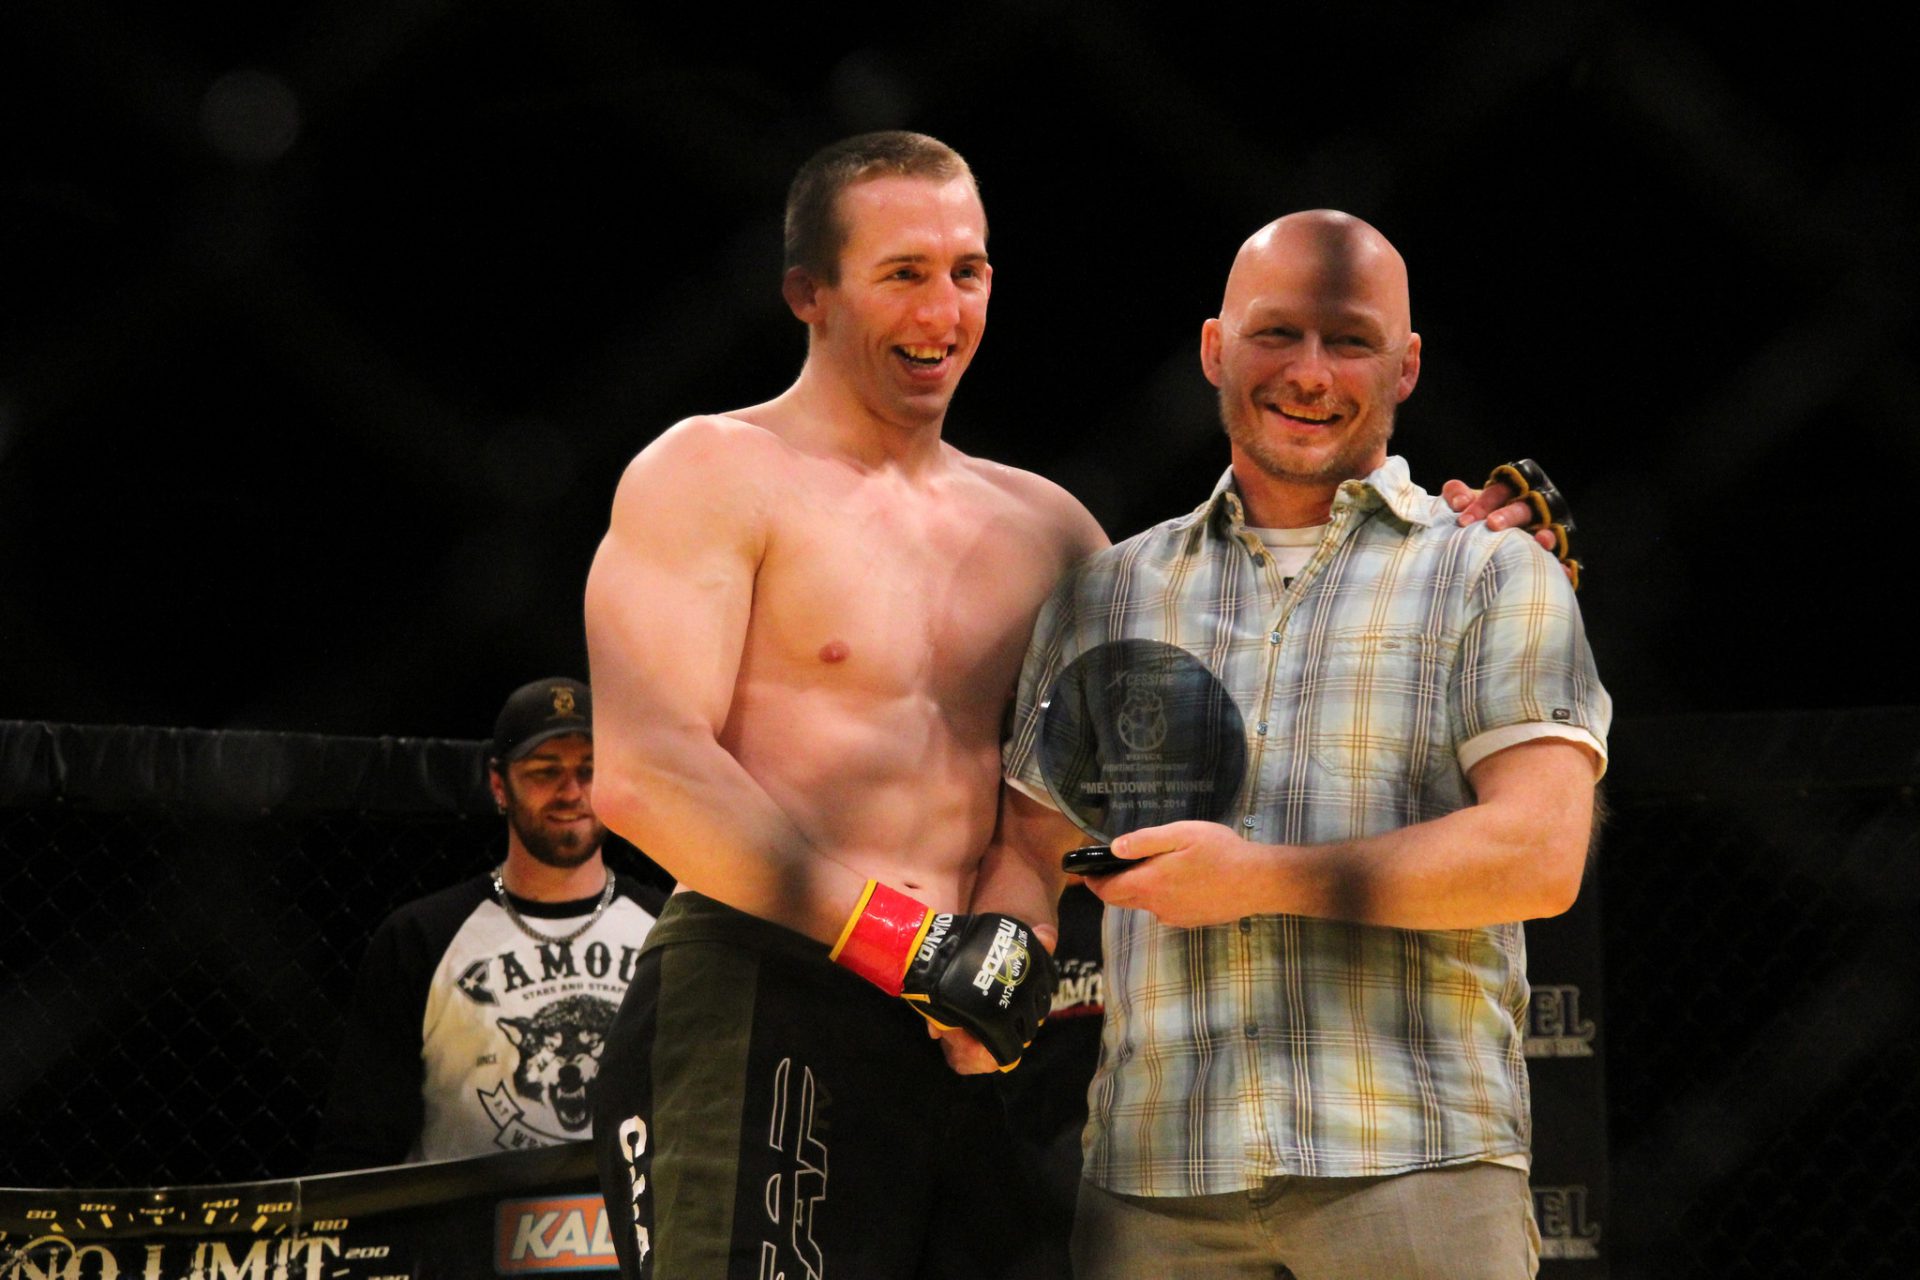 Jebb and Carriere on top at Grande Prairie MMA event